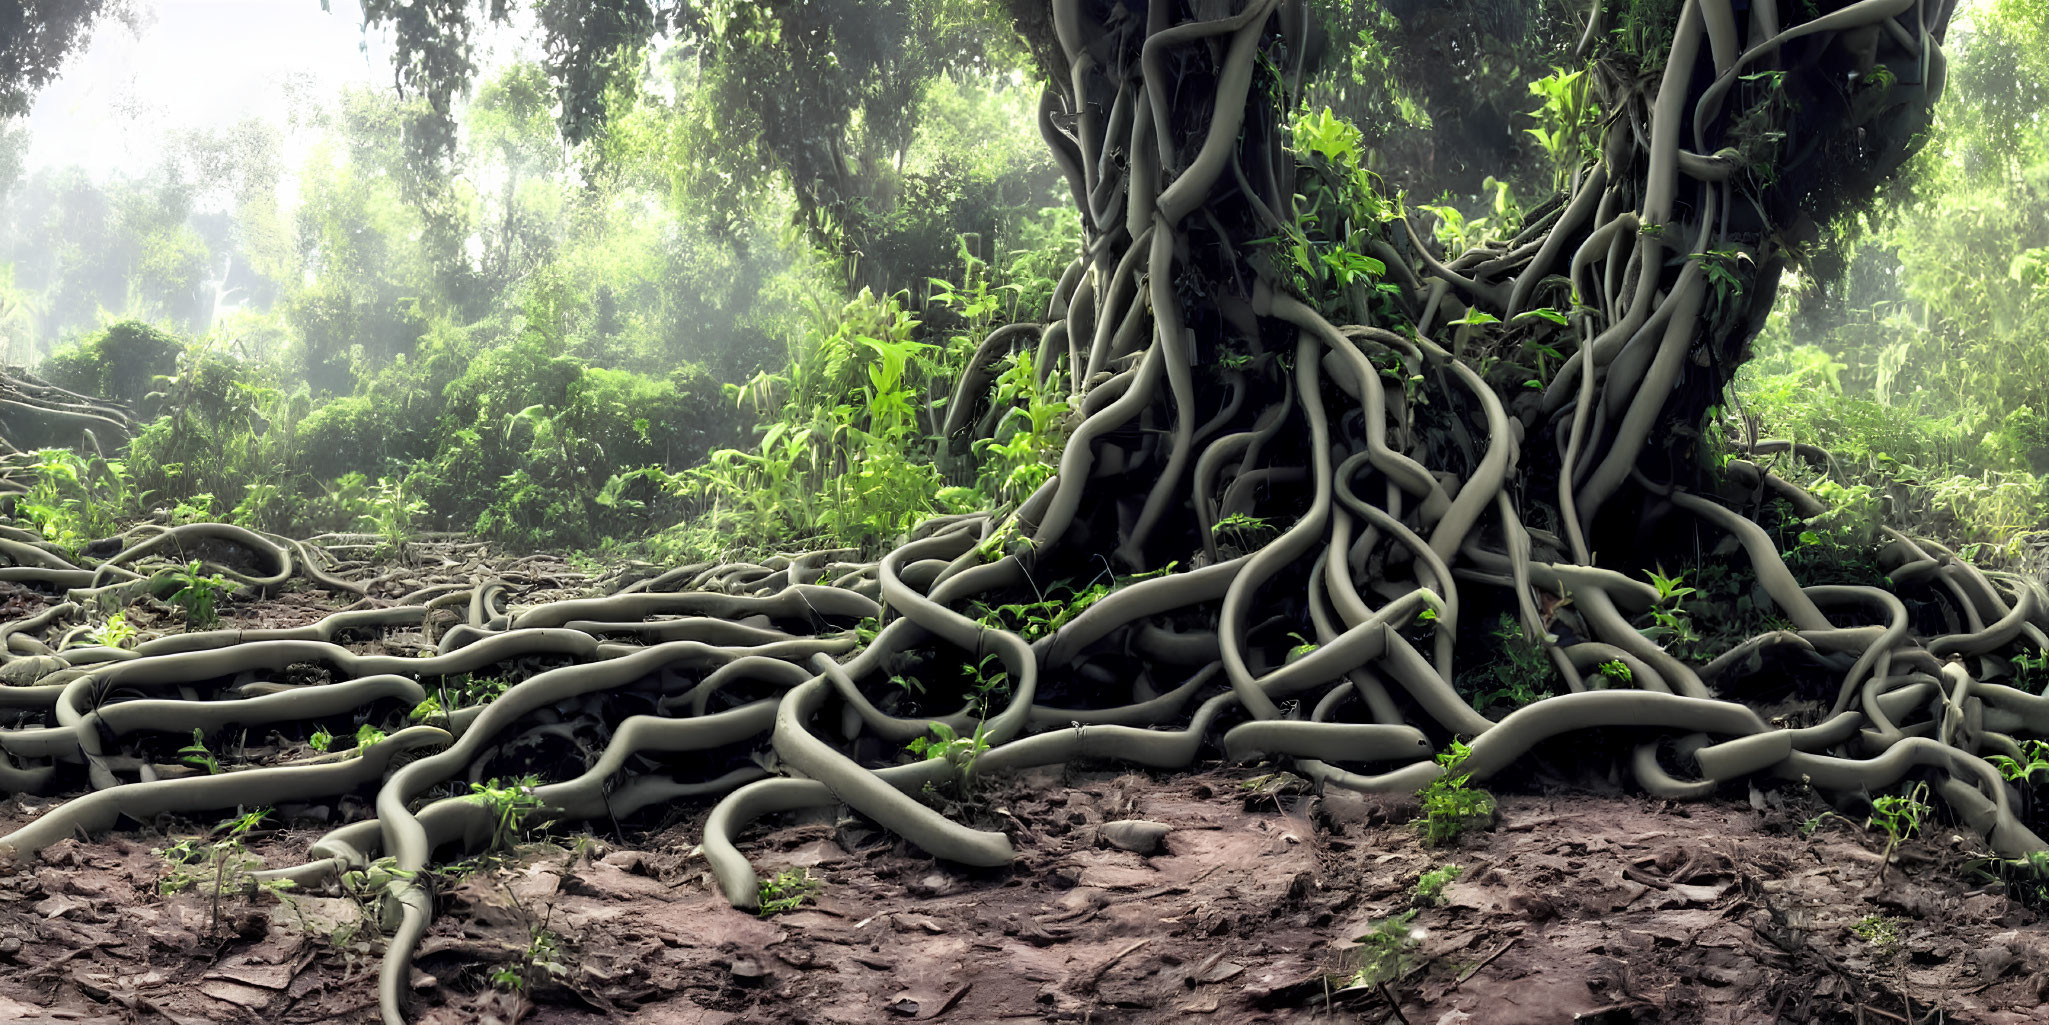 Misty forest scene with intertwined tree roots